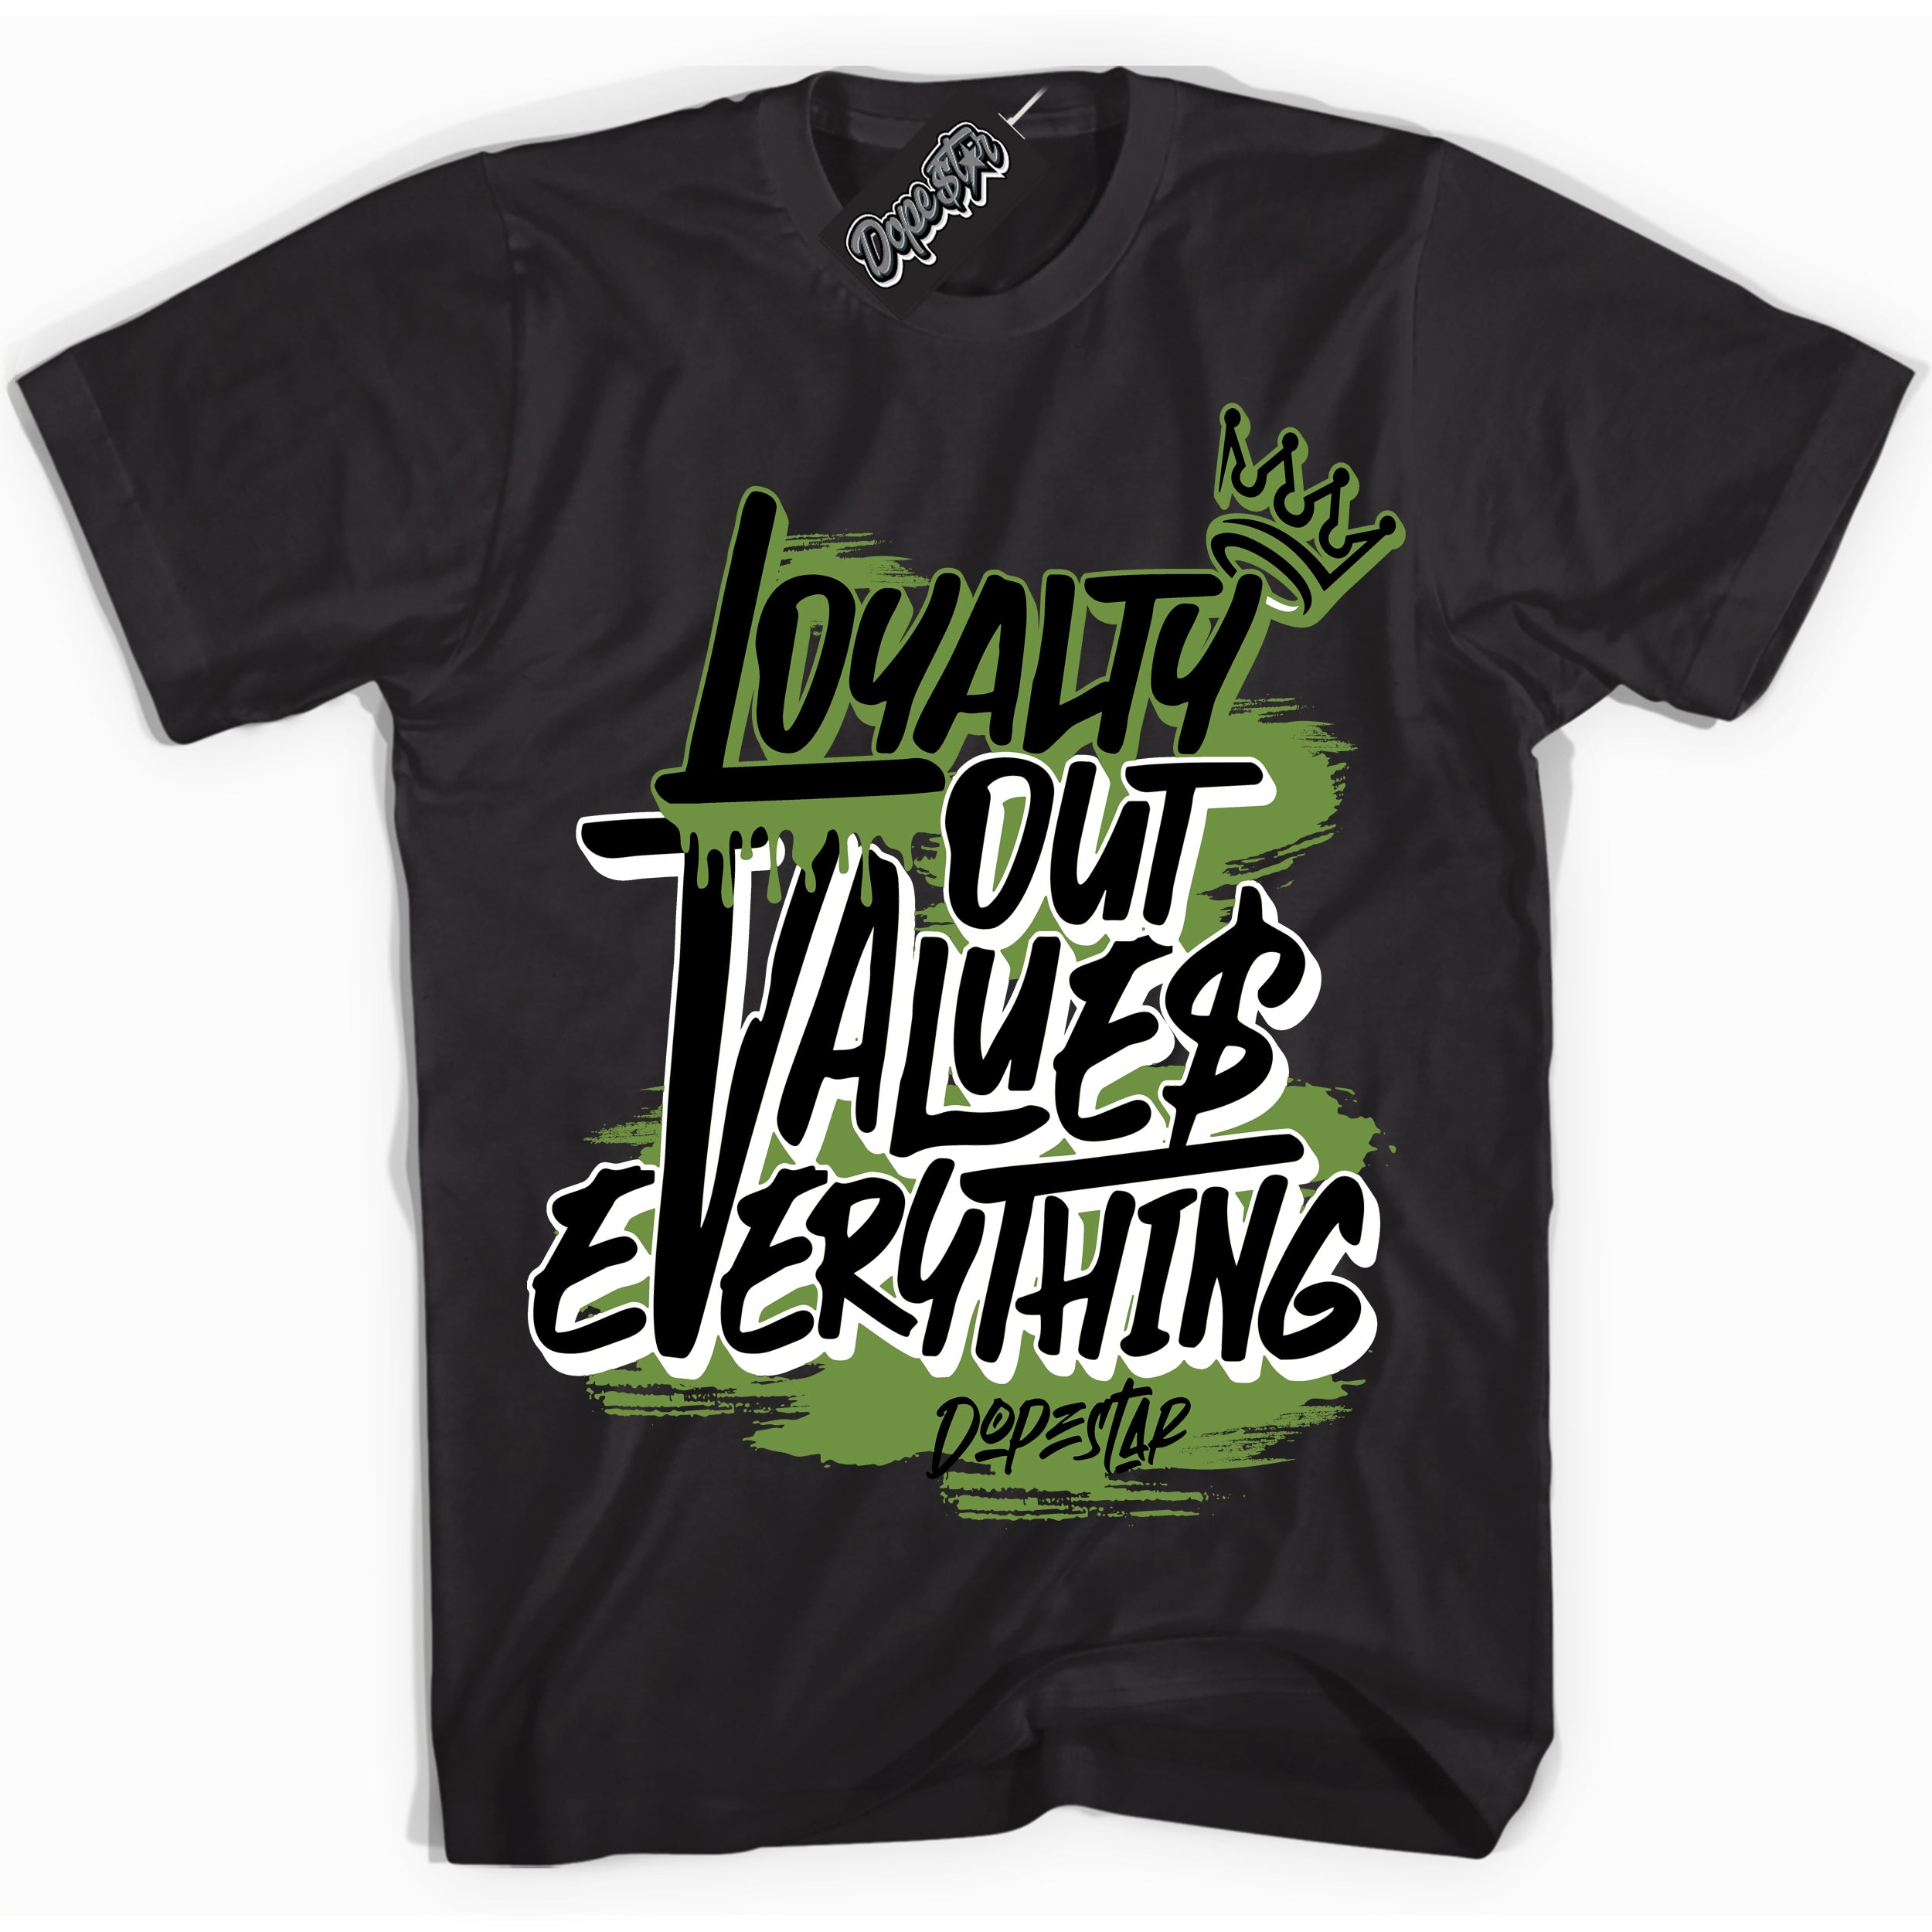 Cool Black Shirt with “ Loyalty Out Values Everything” design that perfectly matches Altitude Green 1s Sneakers.